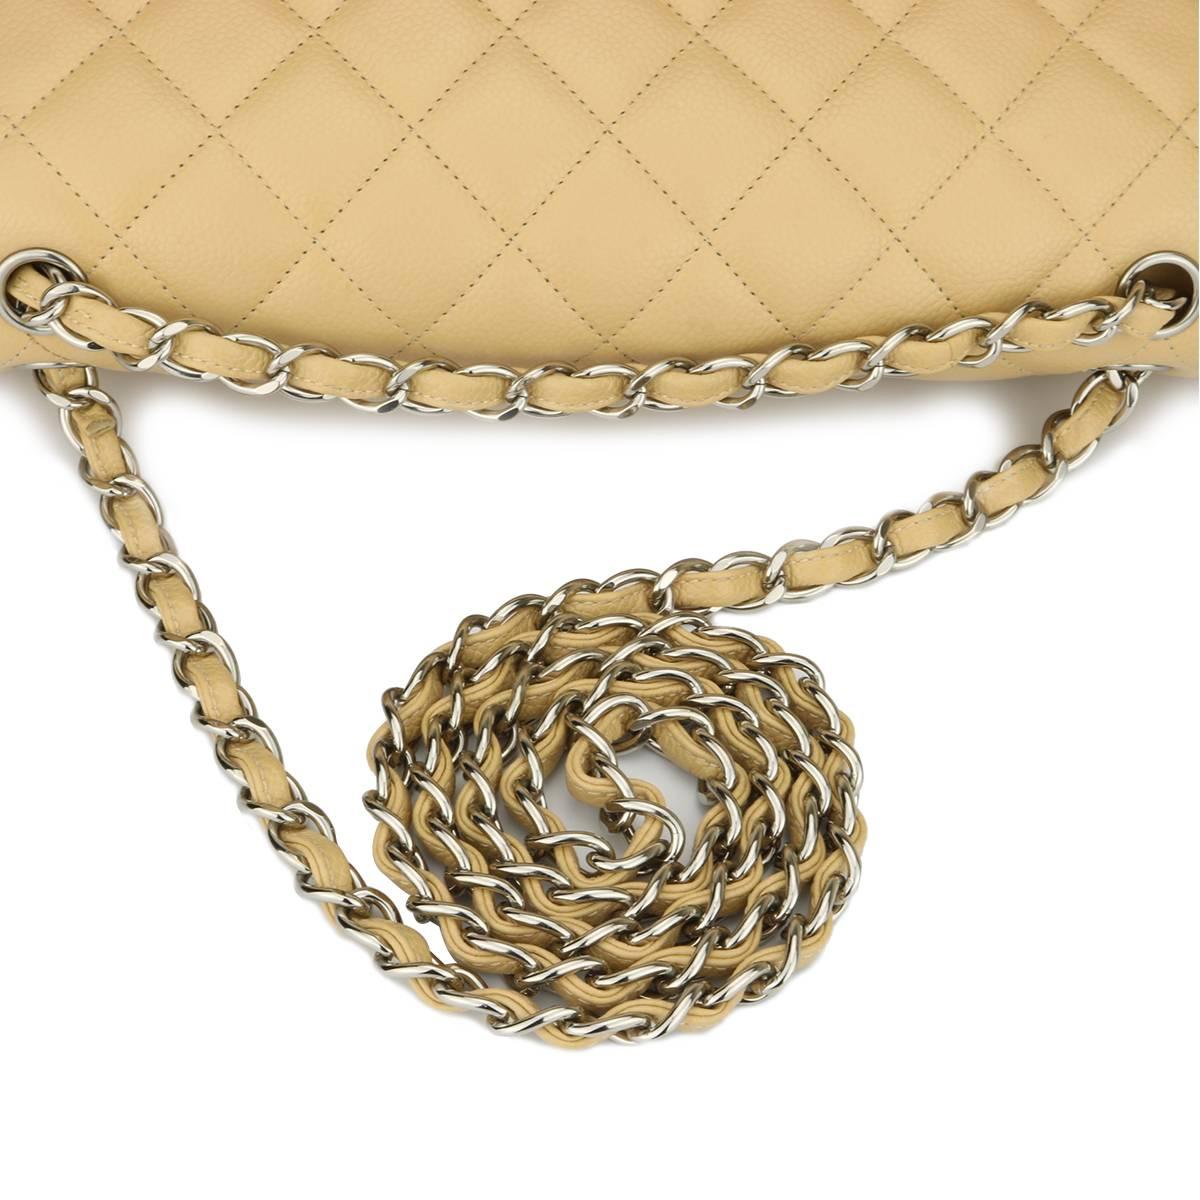 CHANEL Double Flap Jumbo Bag Beige Clair Caviar with Silver Hardware 2013 8